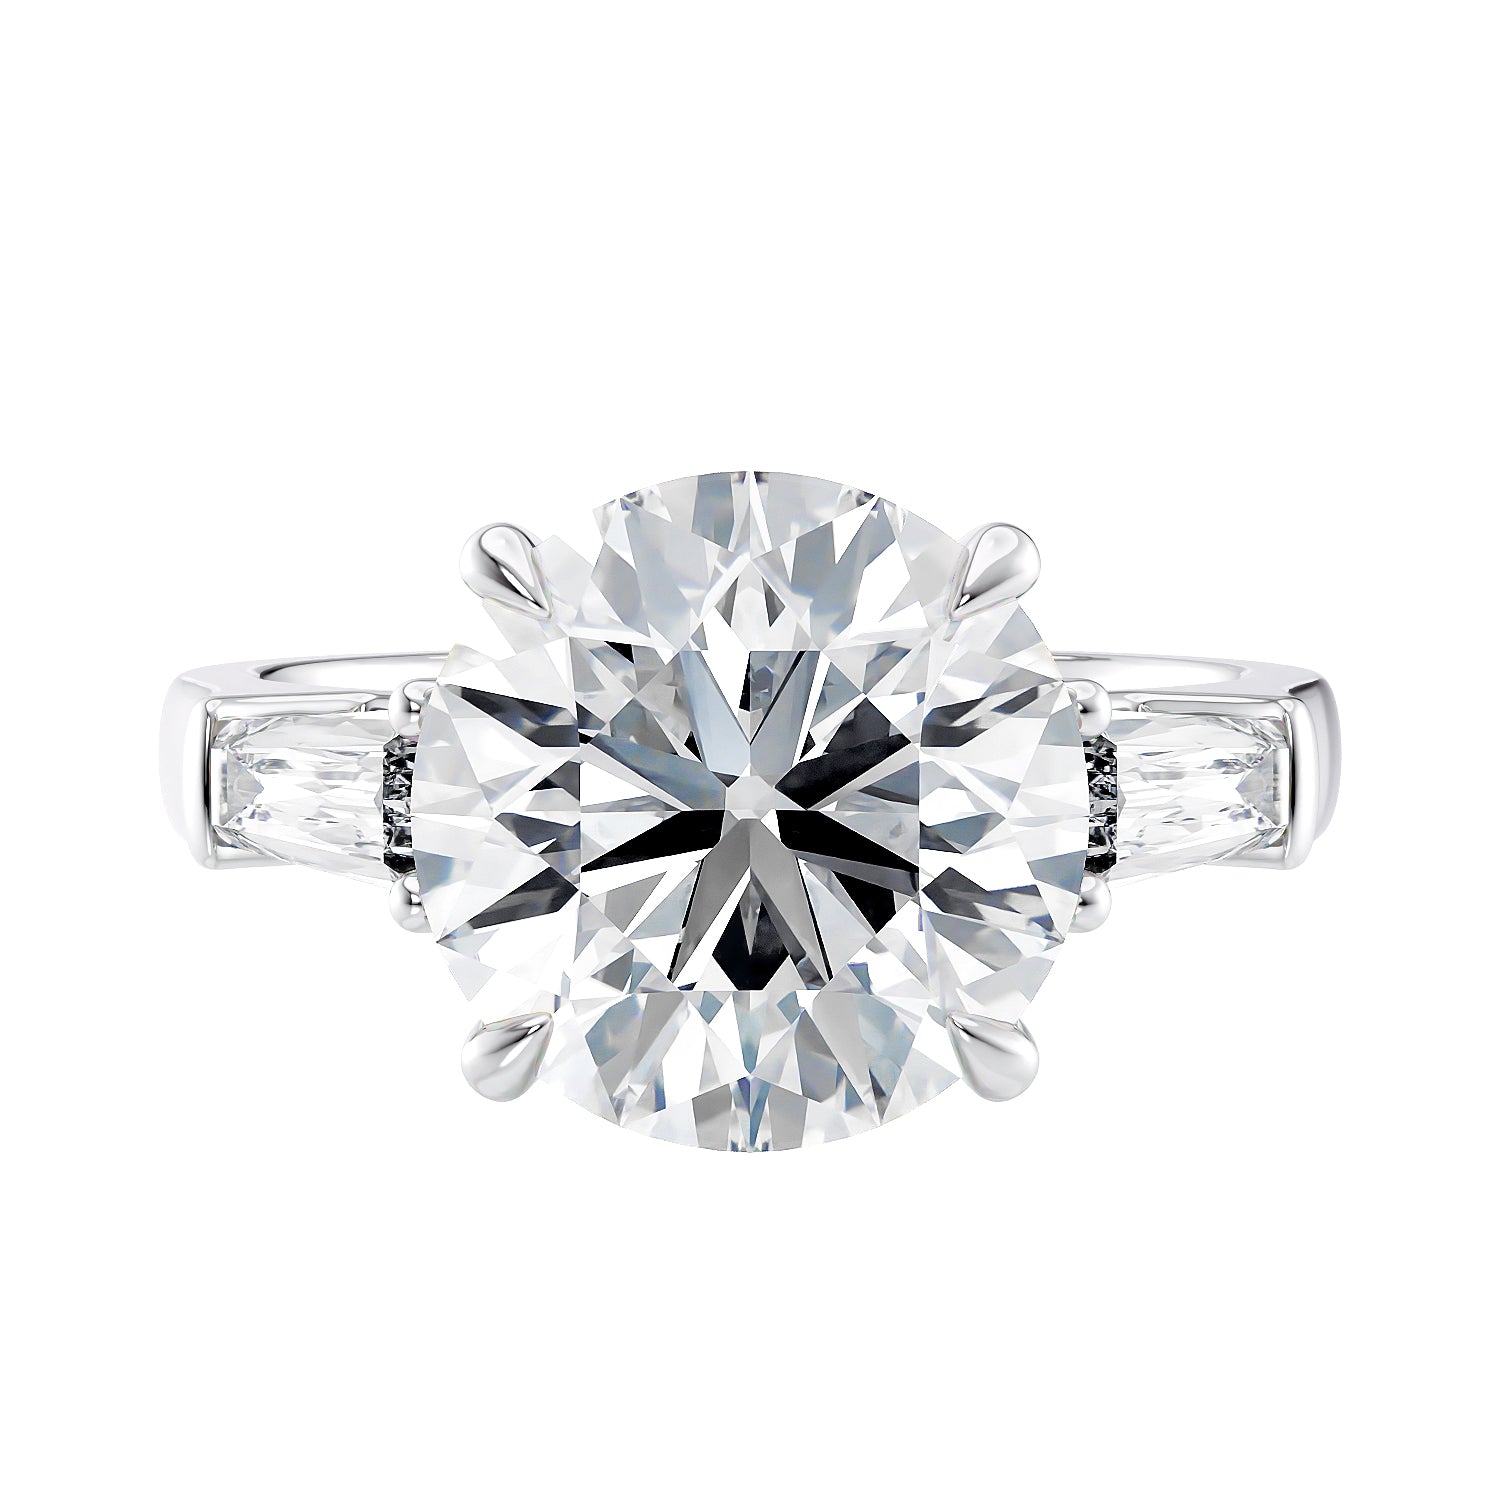 Round brilliant cut lab grown diamond engagement ring with tapered baguette side stones 18ct white gold front view.